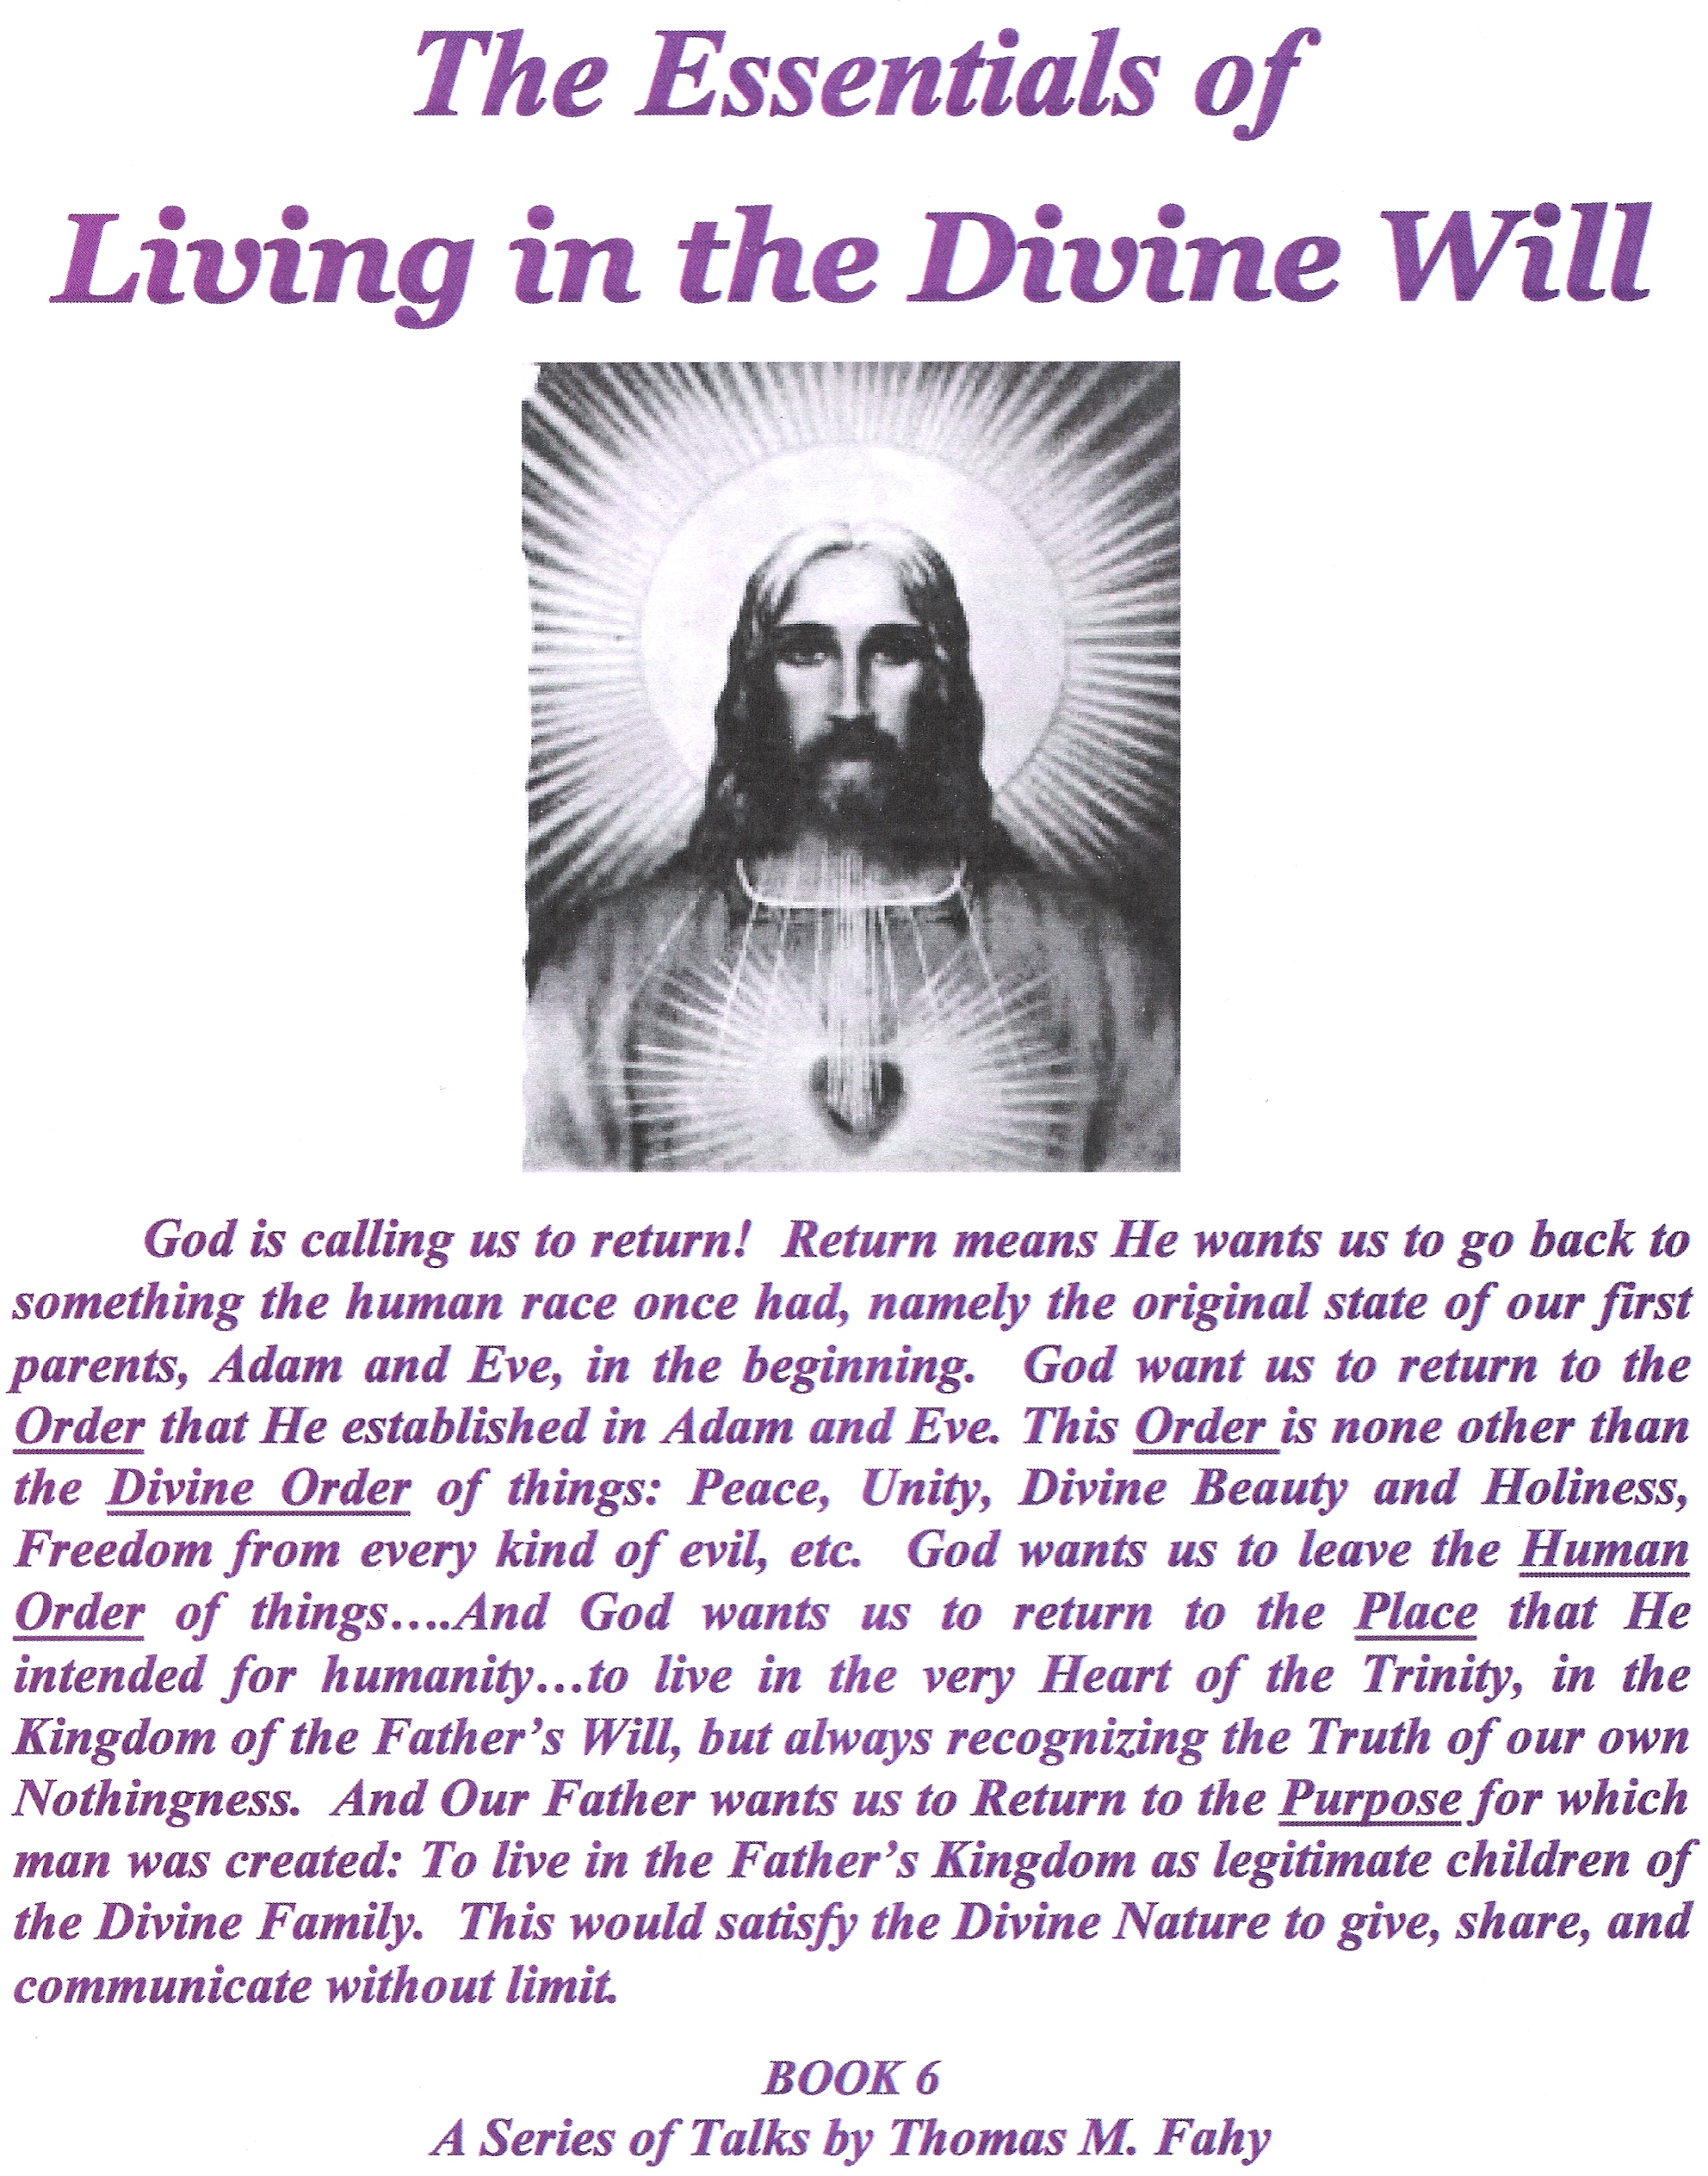 The Essentials of Living in Divine Will